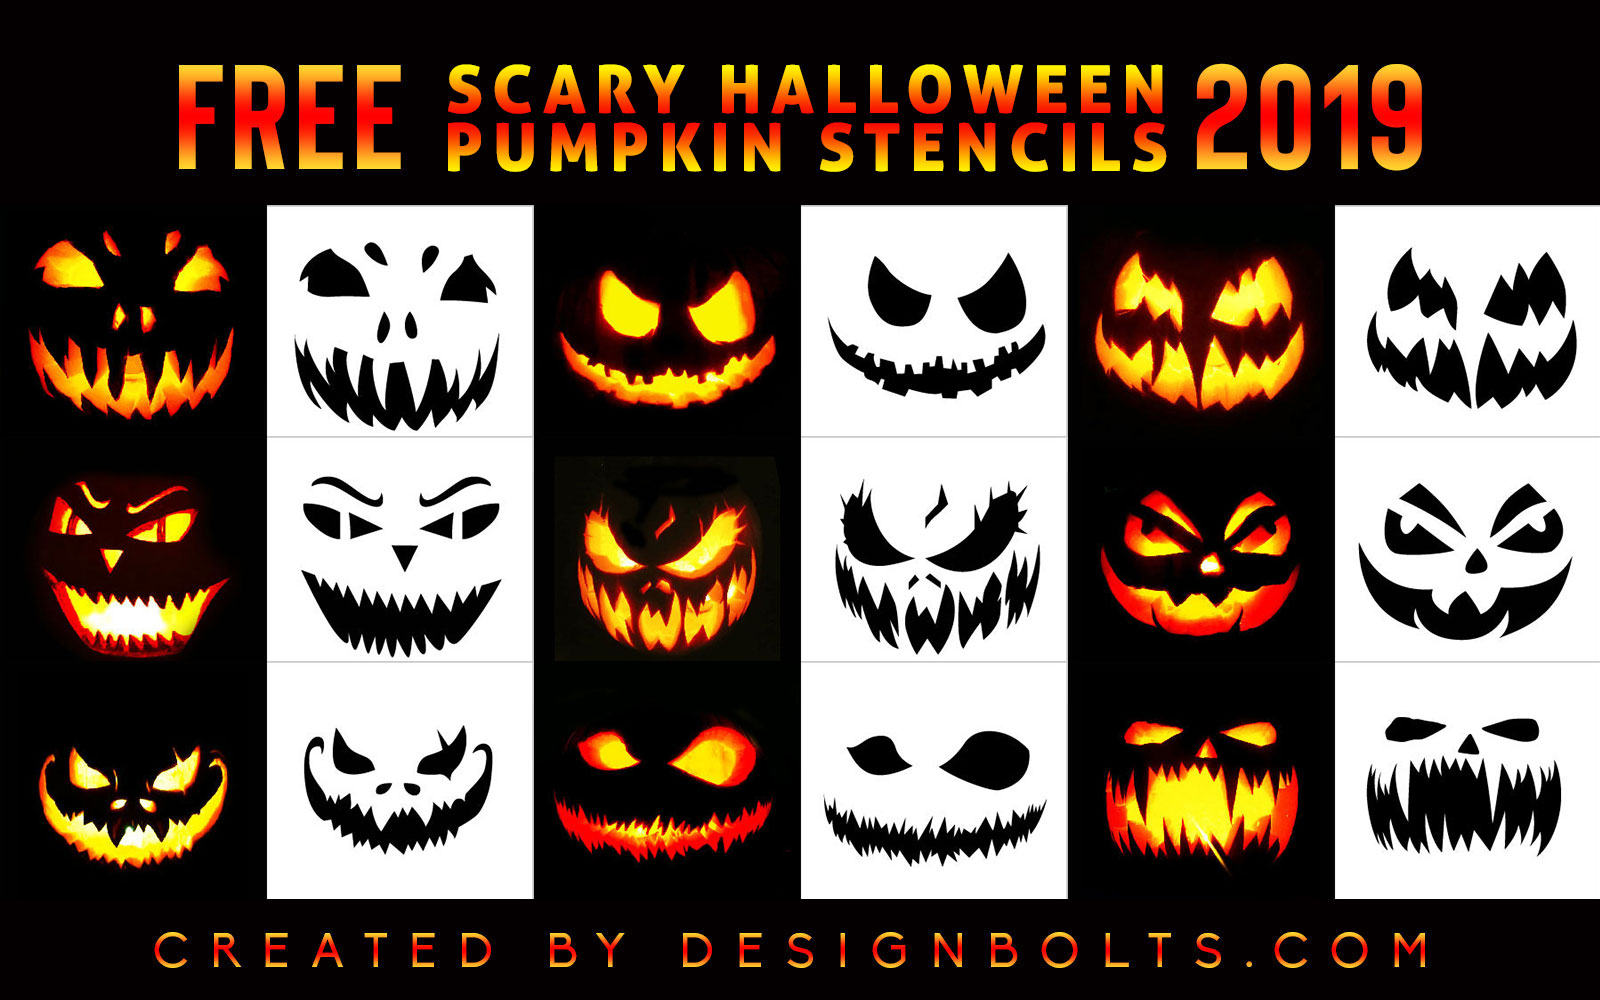 10 Free Scary Halloween Pumpkin Carving Stencils Patterns Ideas 2019 Jack O Lantern Faces Images Designbolts,Types Of Birch Trees In Wisconsin